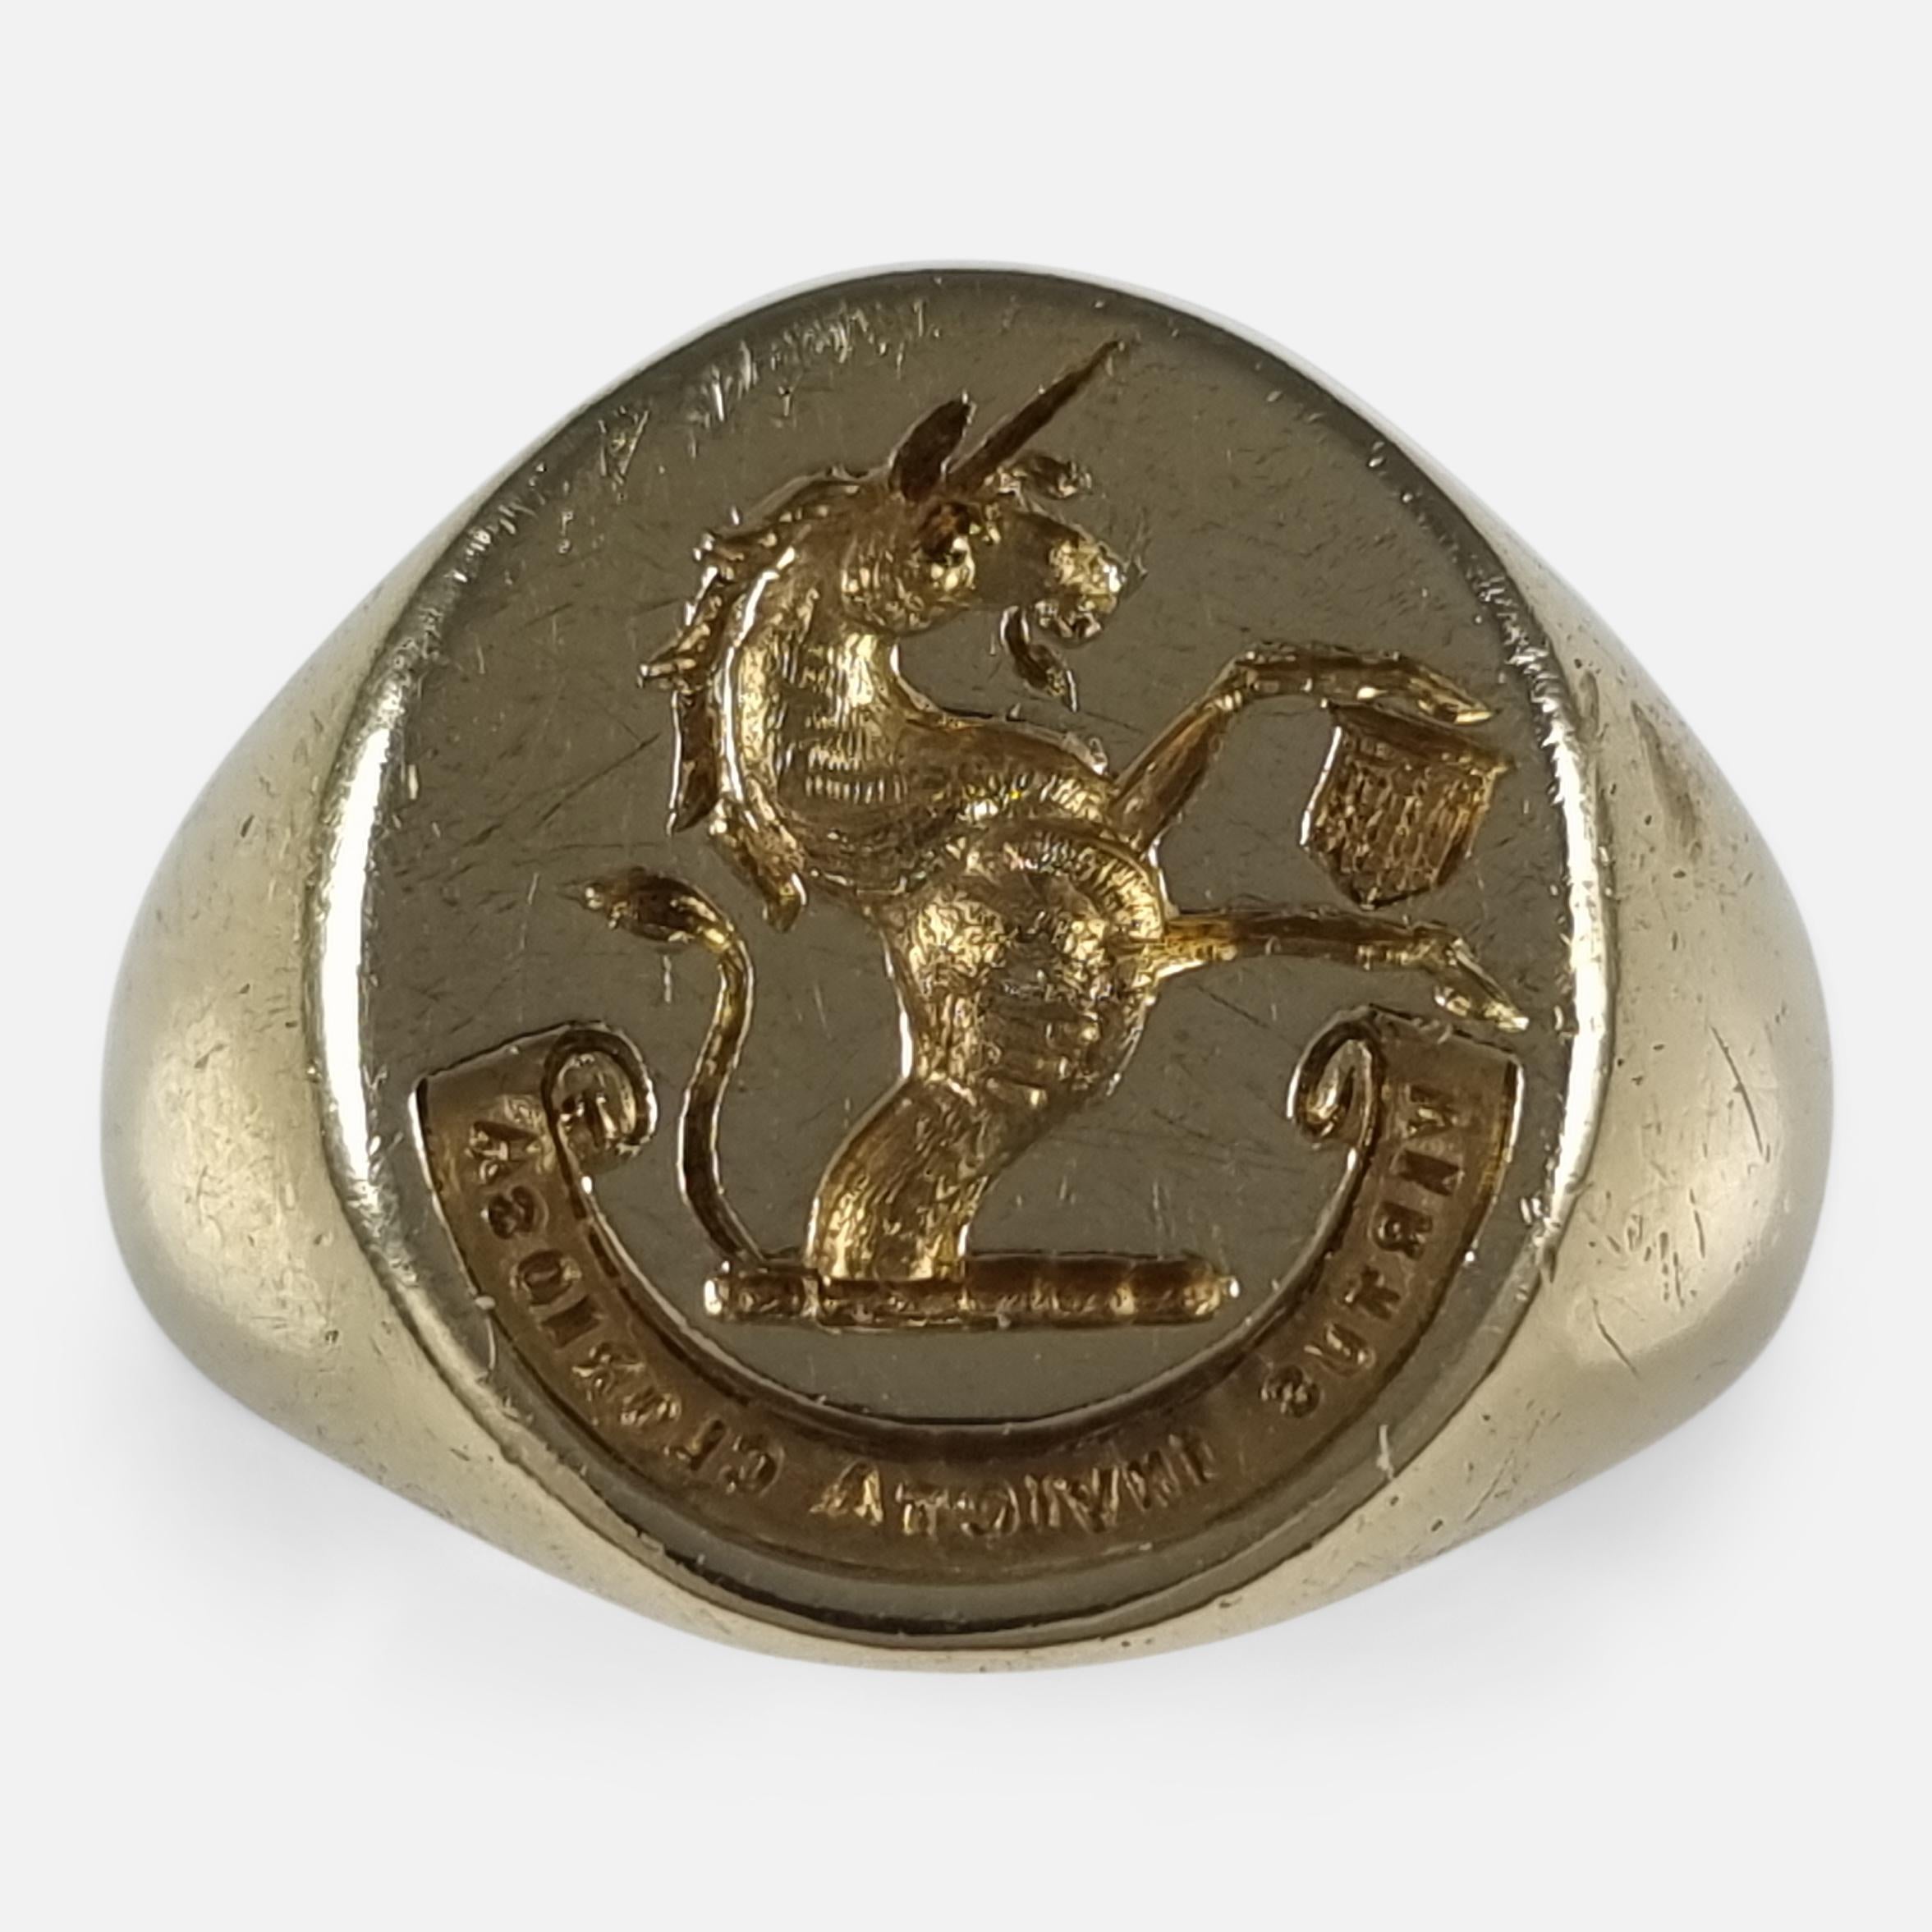 An Elizabeth II signet ring crafted in 18ct yellow gold. It features an oval-shaped head, engraved with an intaglio of a demi-unicorn beside a shield, representing the Thomas family crest. Below this is the Latin inscription 'VIRTUS INVICTA